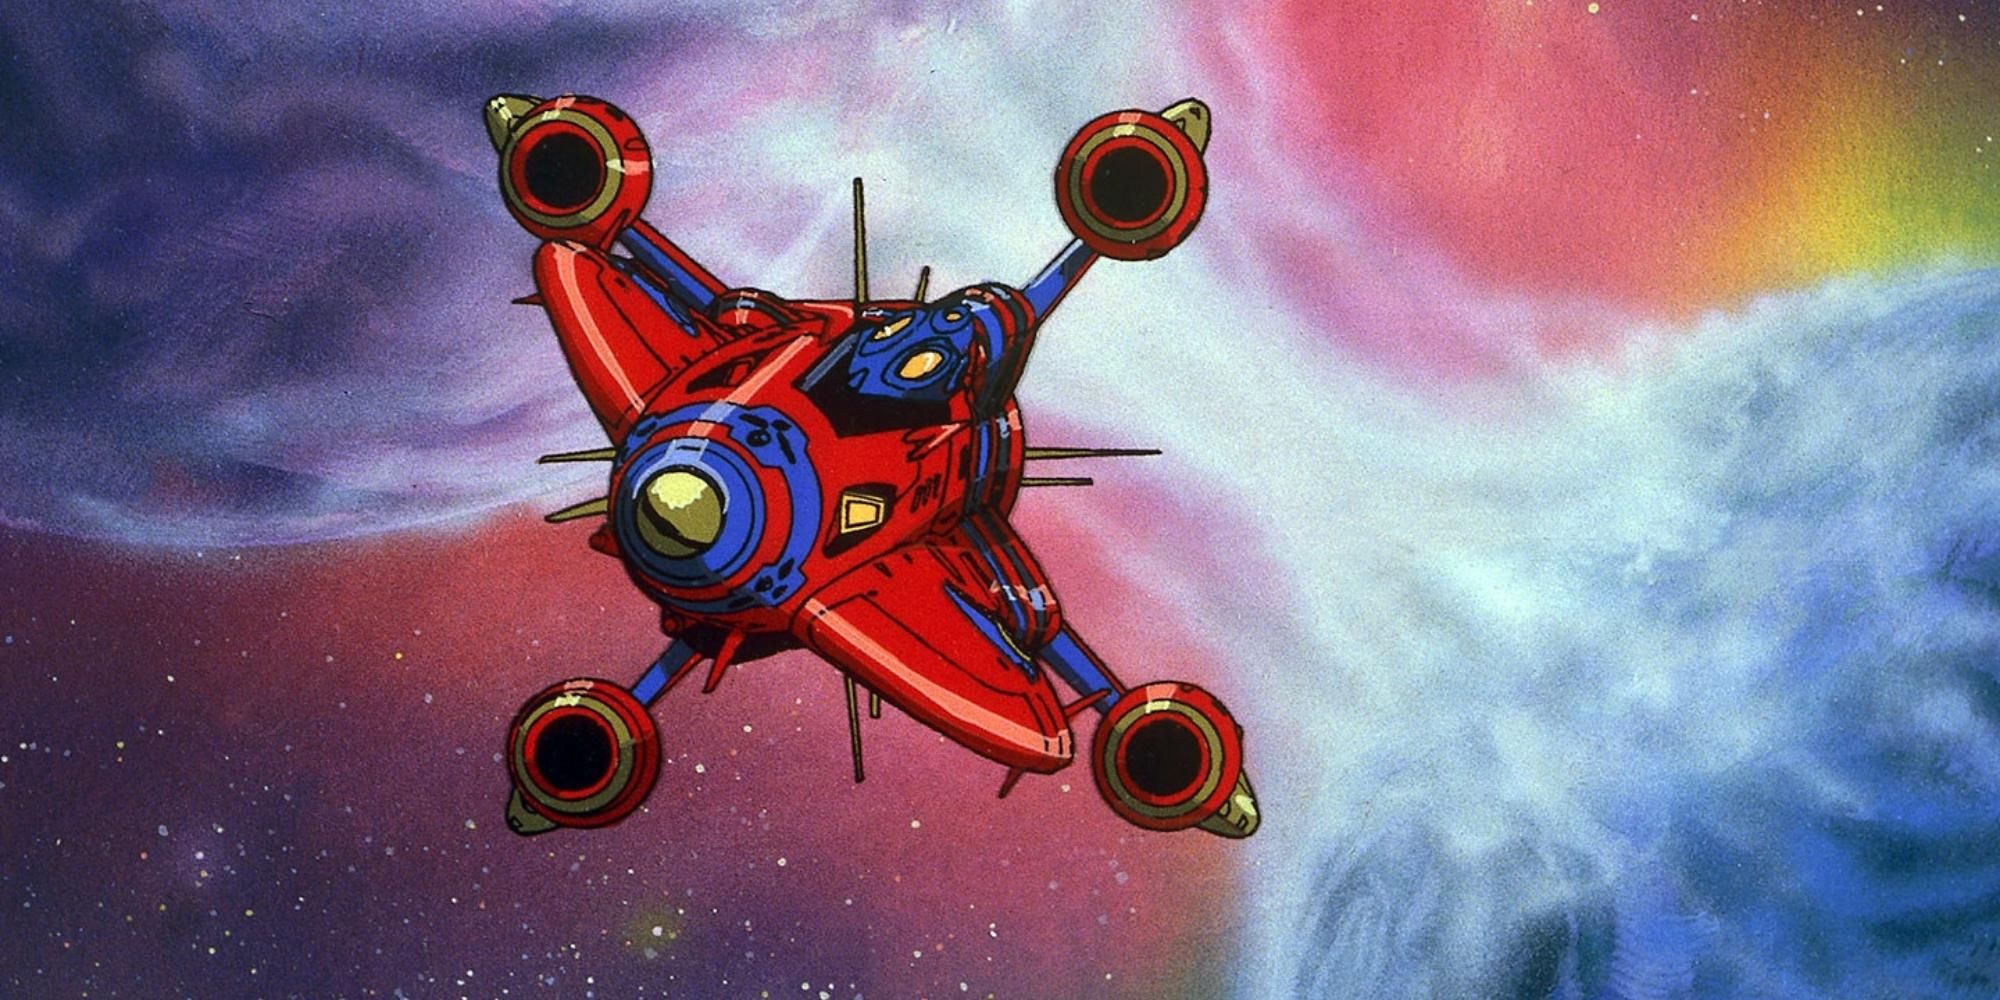 The Outlaw Star spaceship in Outlaw-Star